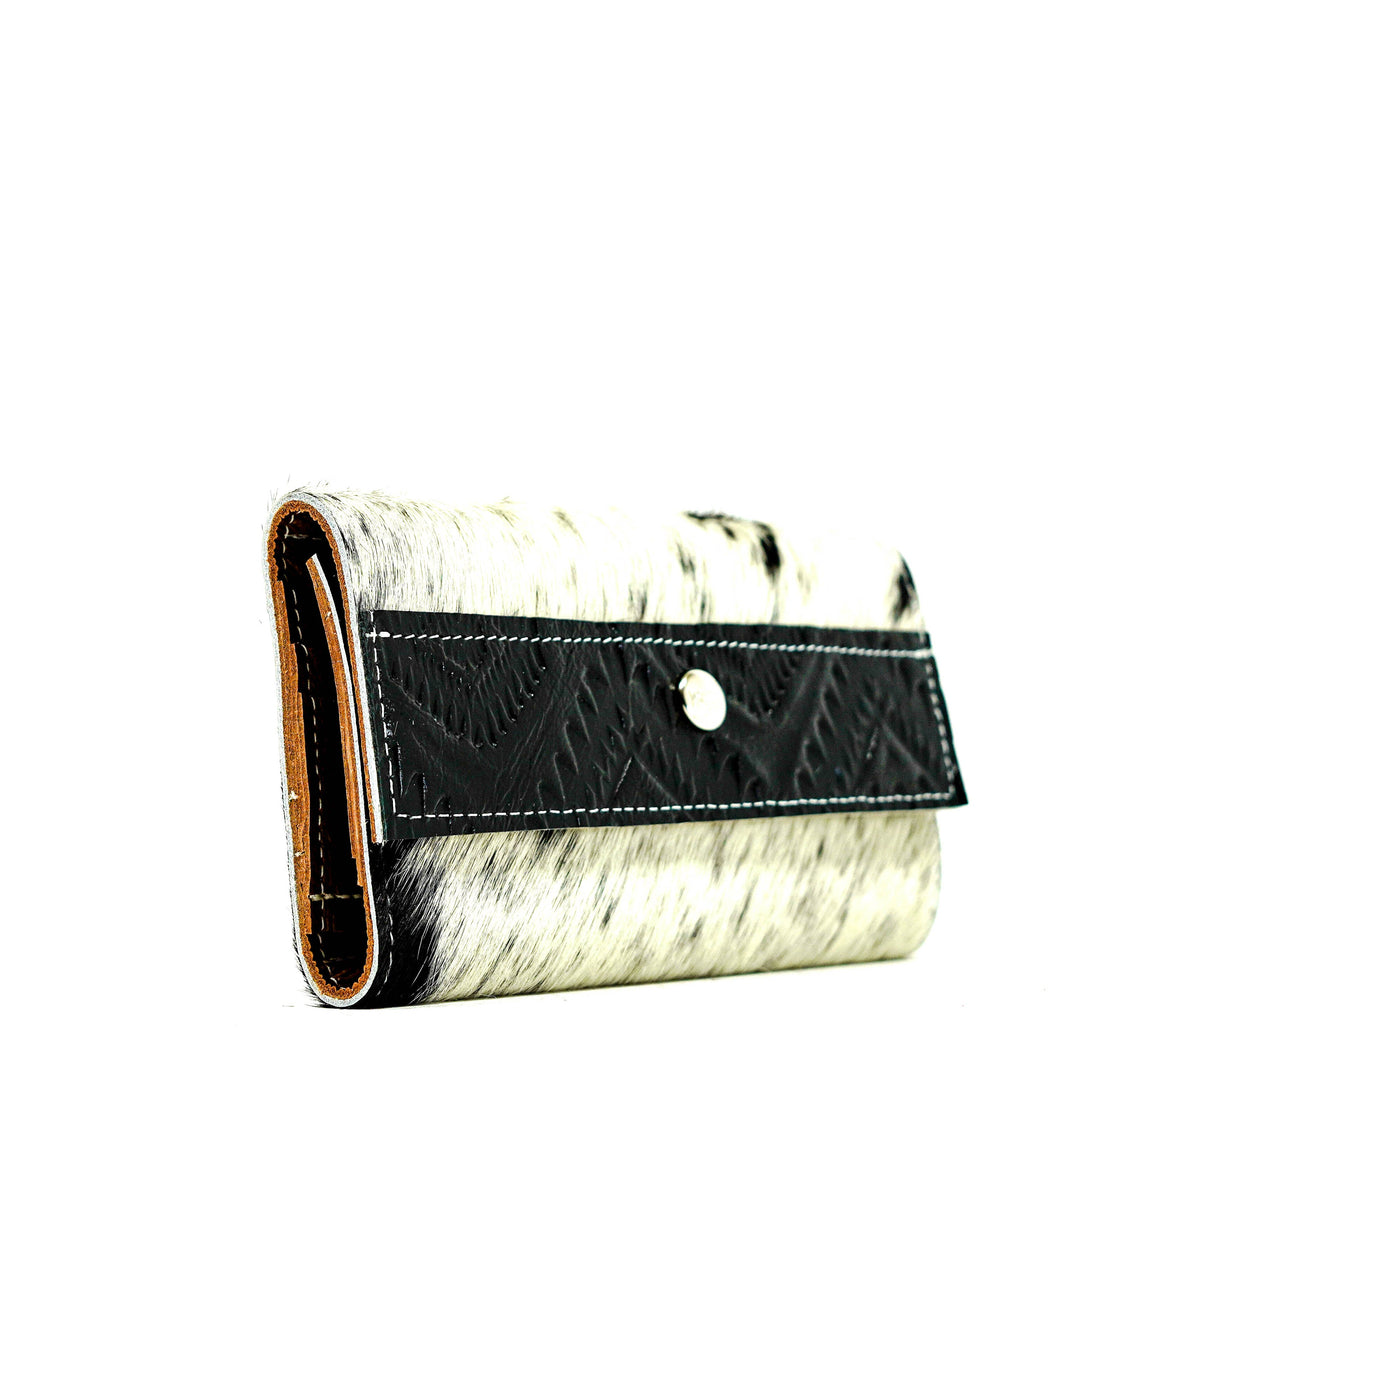 Kacey Wallet - Black & White w/ Onyx Aztec-Kacey Wallet-Western-Cowhide-Bags-Handmade-Products-Gifts-Dancing Cactus Designs